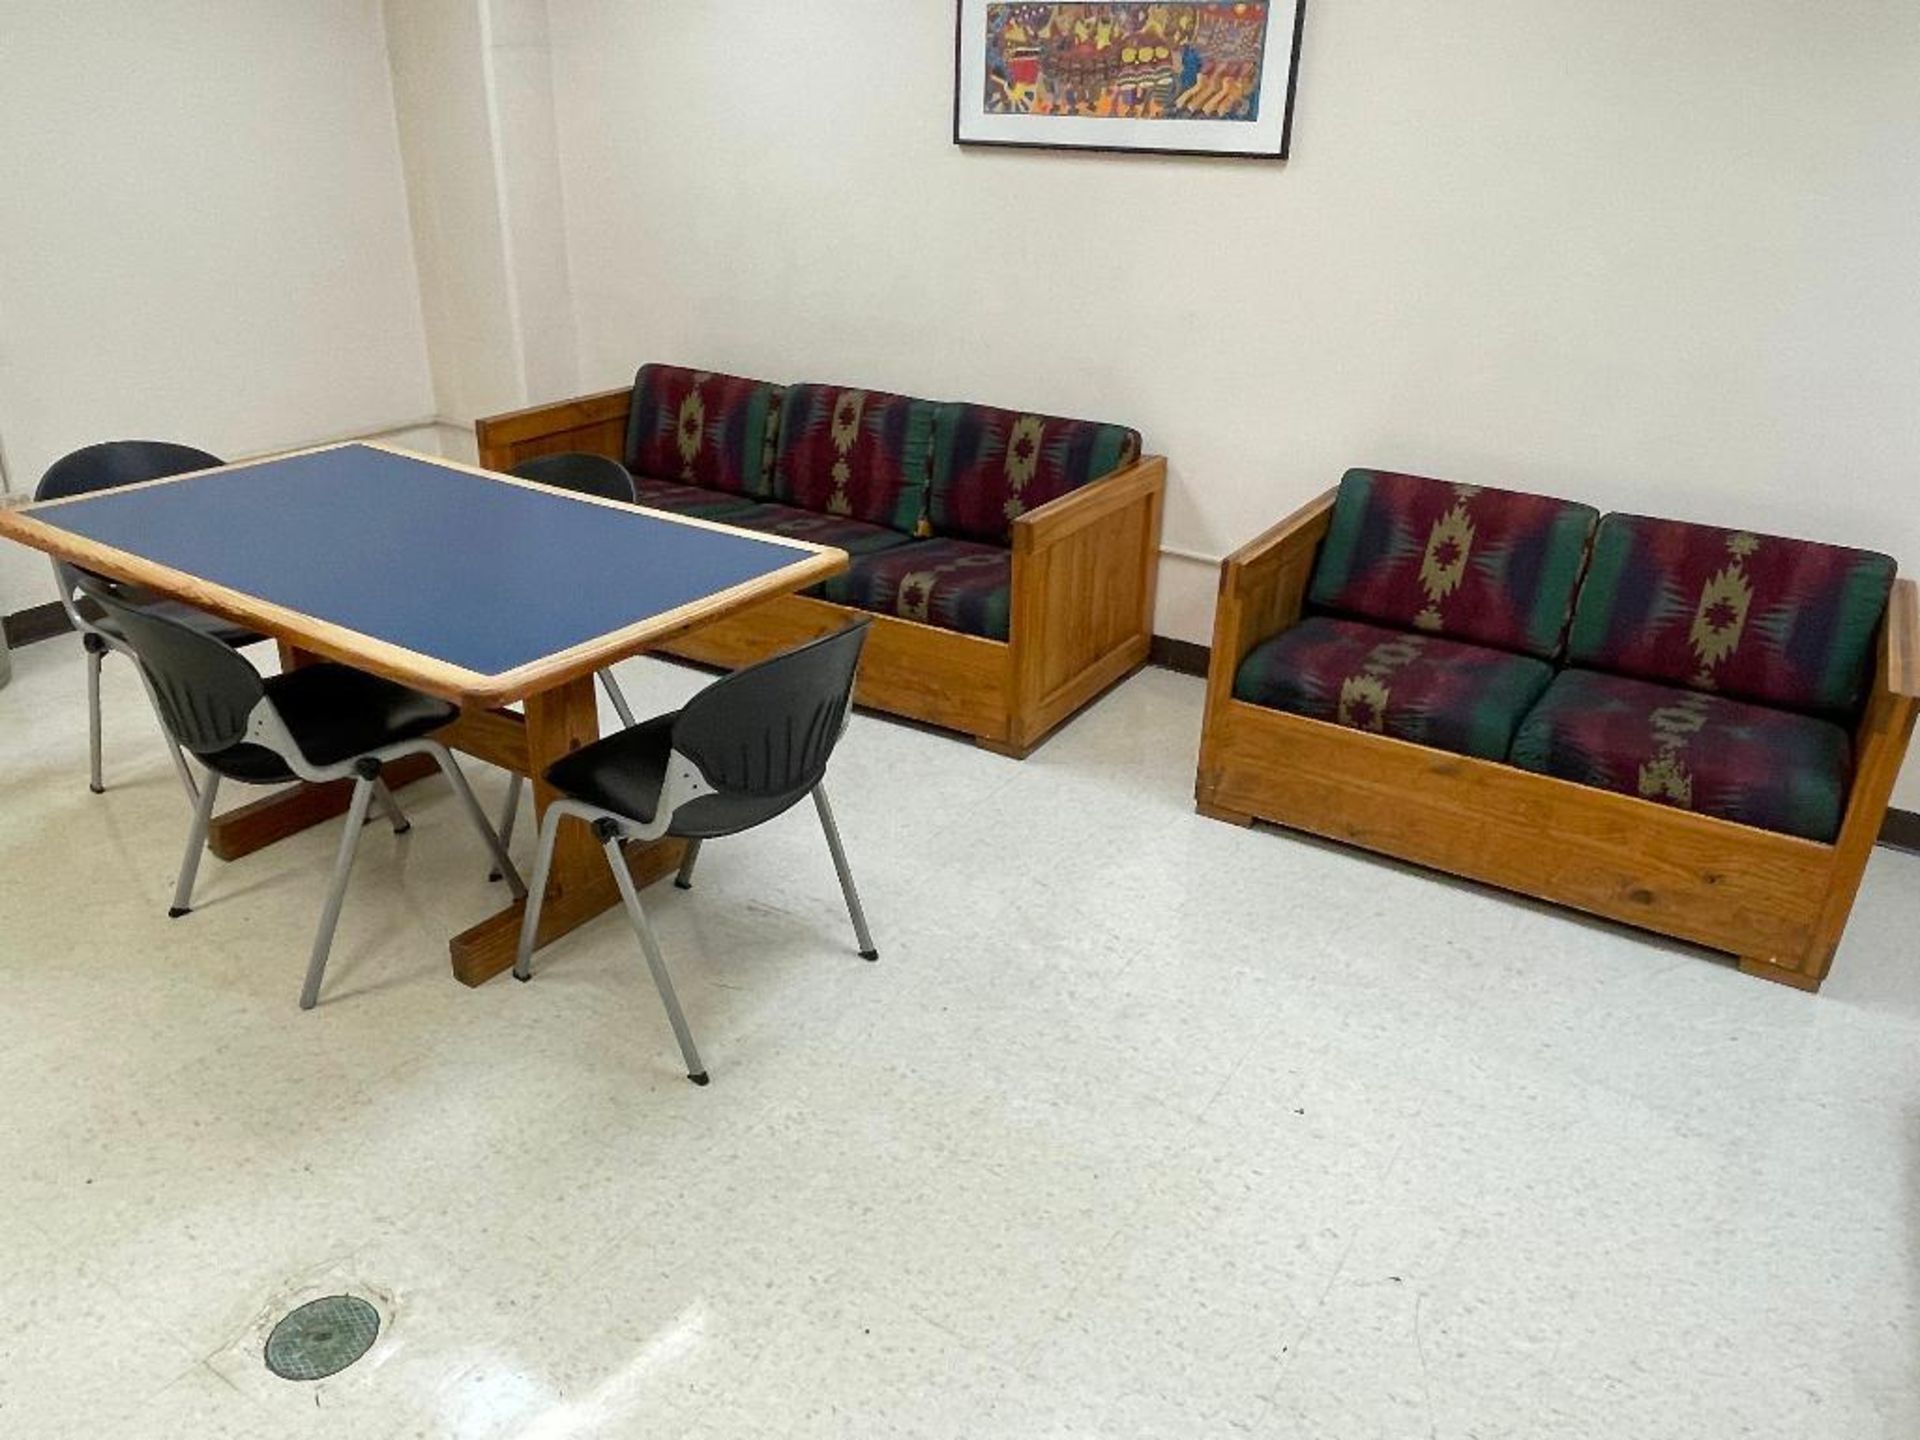 DESCRIPTION: REMAINING CONTENTS OF SNACK ROOM - (2) WOODEN COUCHES, (1) CHAIR, (1) TABLE, AND (2) ST